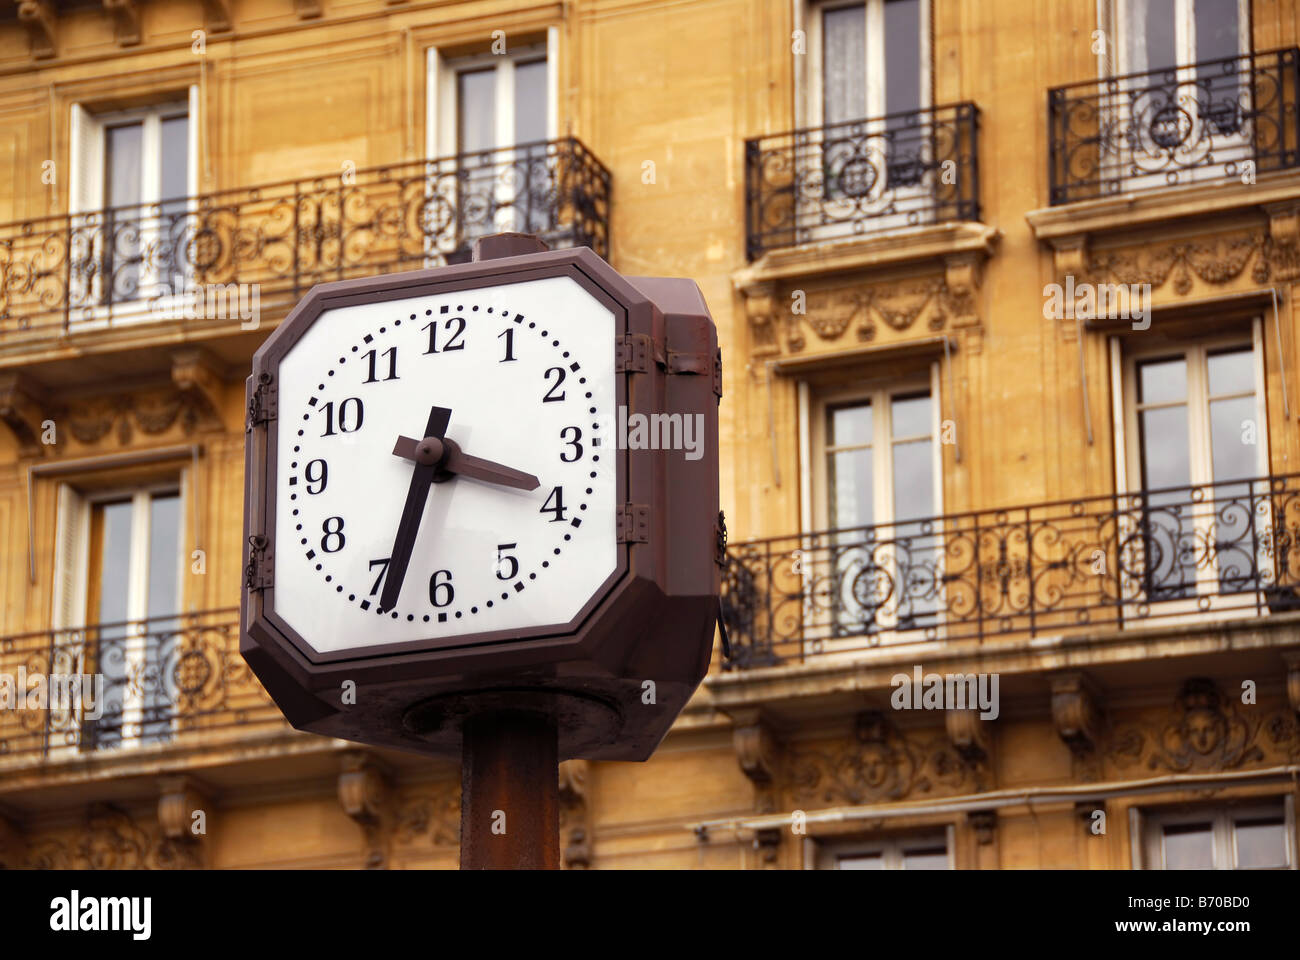 Public clock in Paris on background of old apartment building Stock Photo